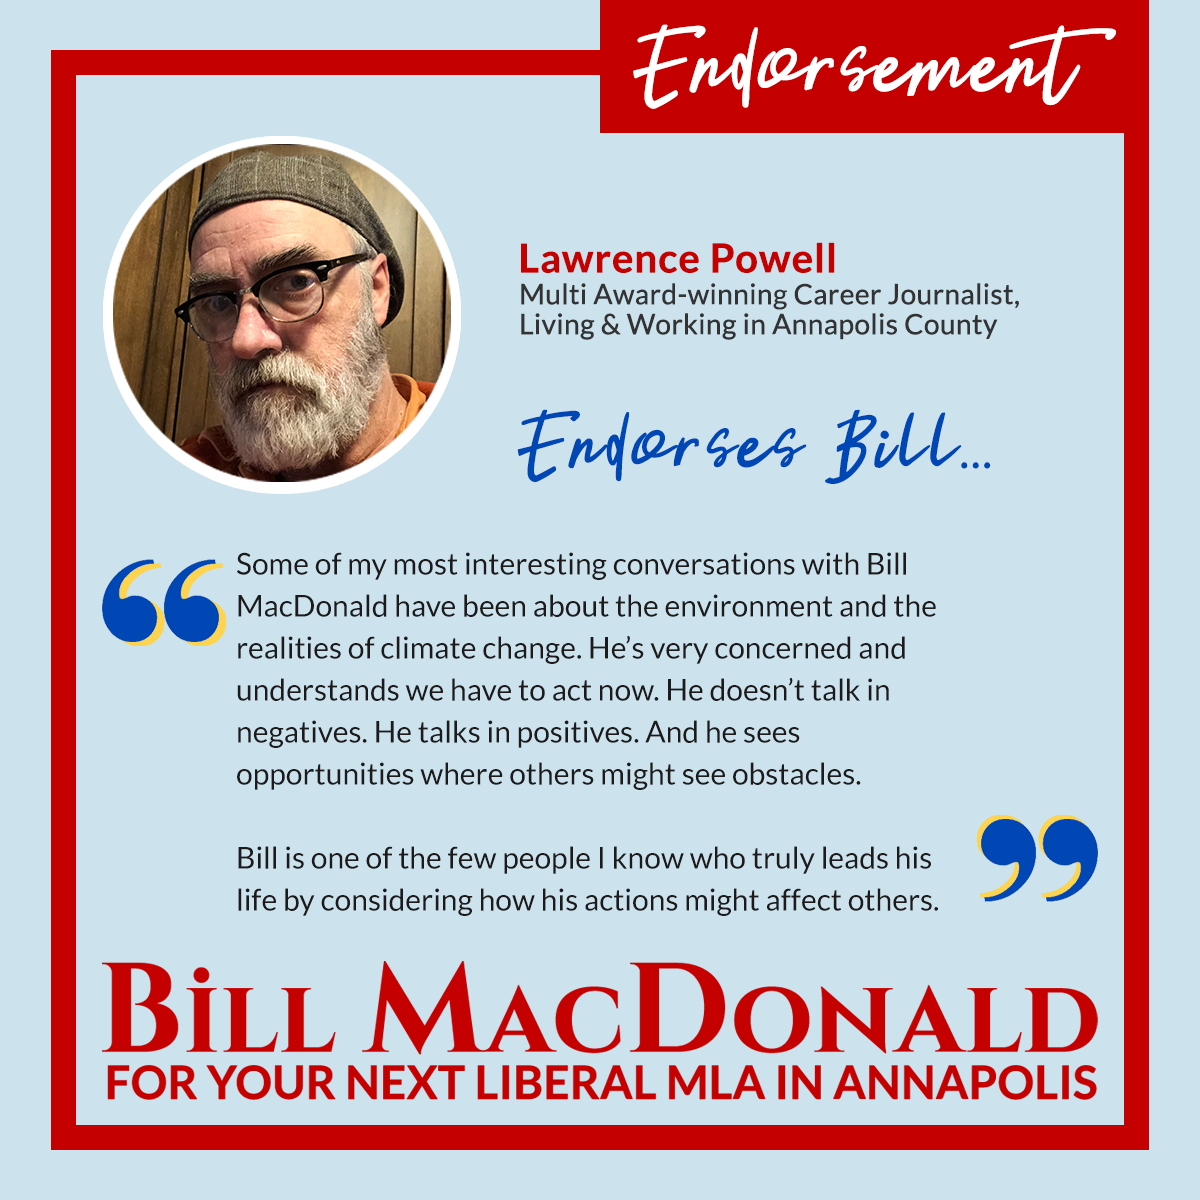 Lawrence Powell endorses Bill MacDonald for your next Liberal MLA in Annapolis